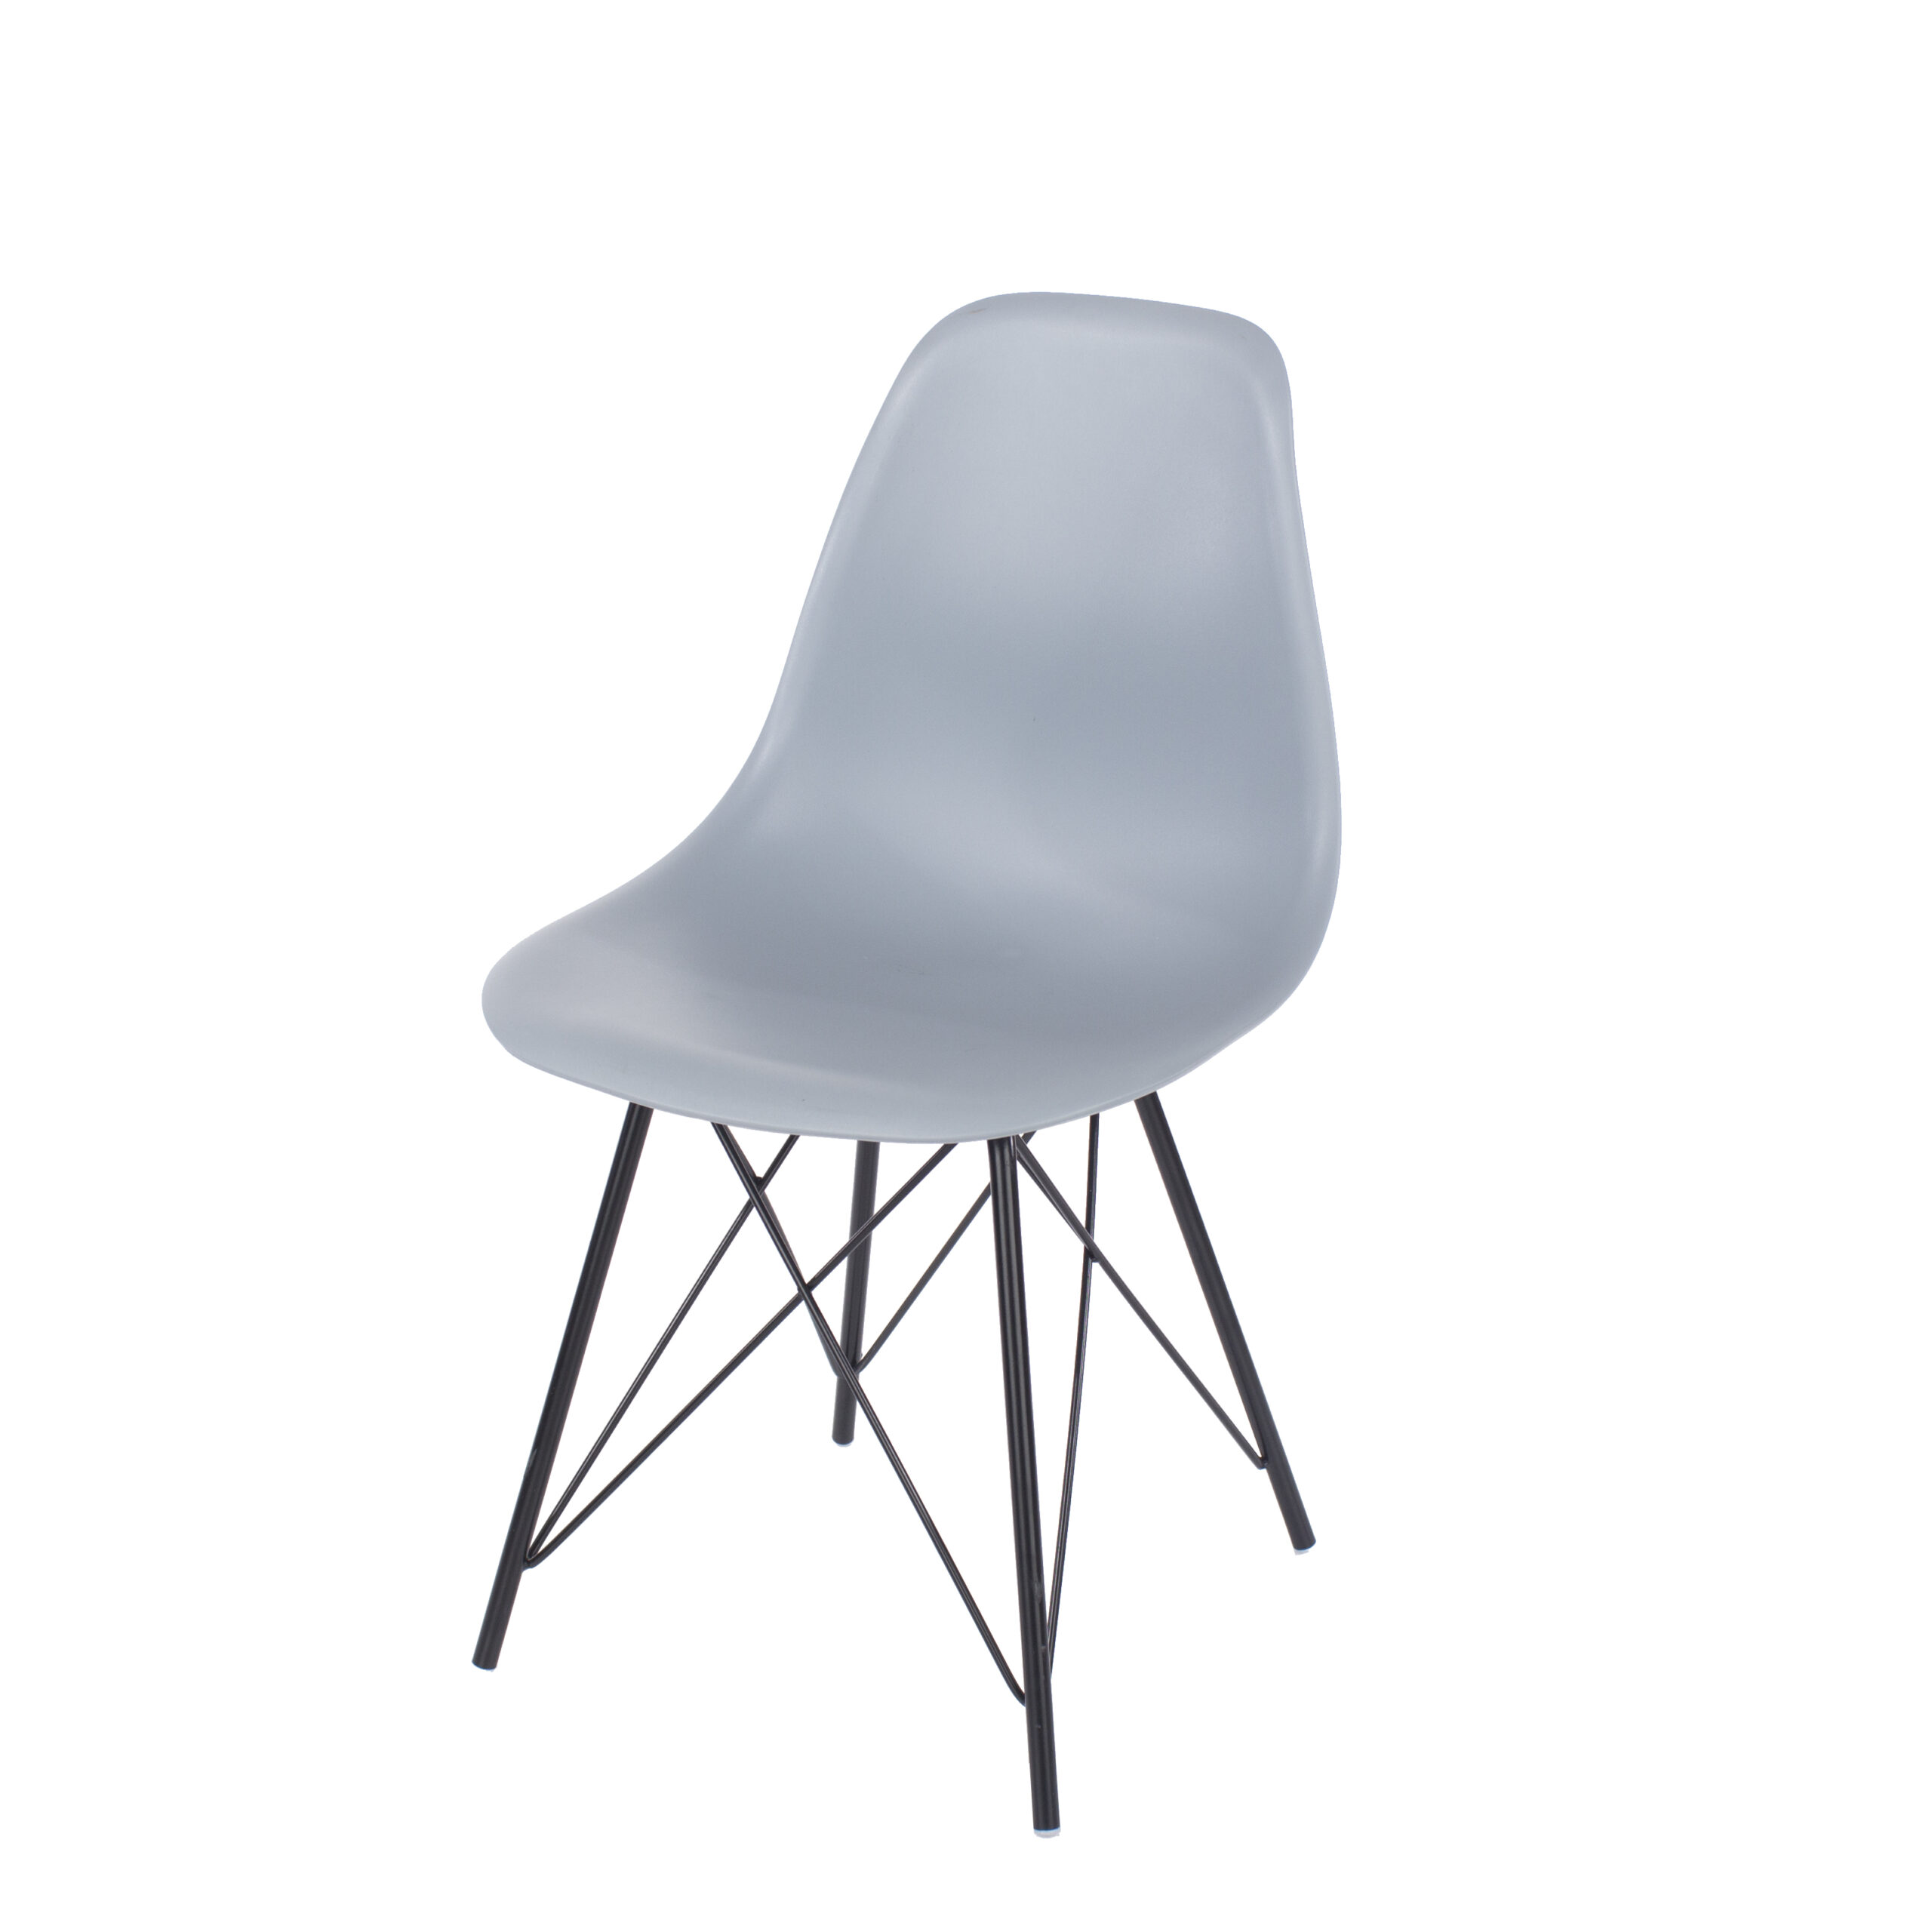 Penny grey plastic chairs with black metal legs (pair)